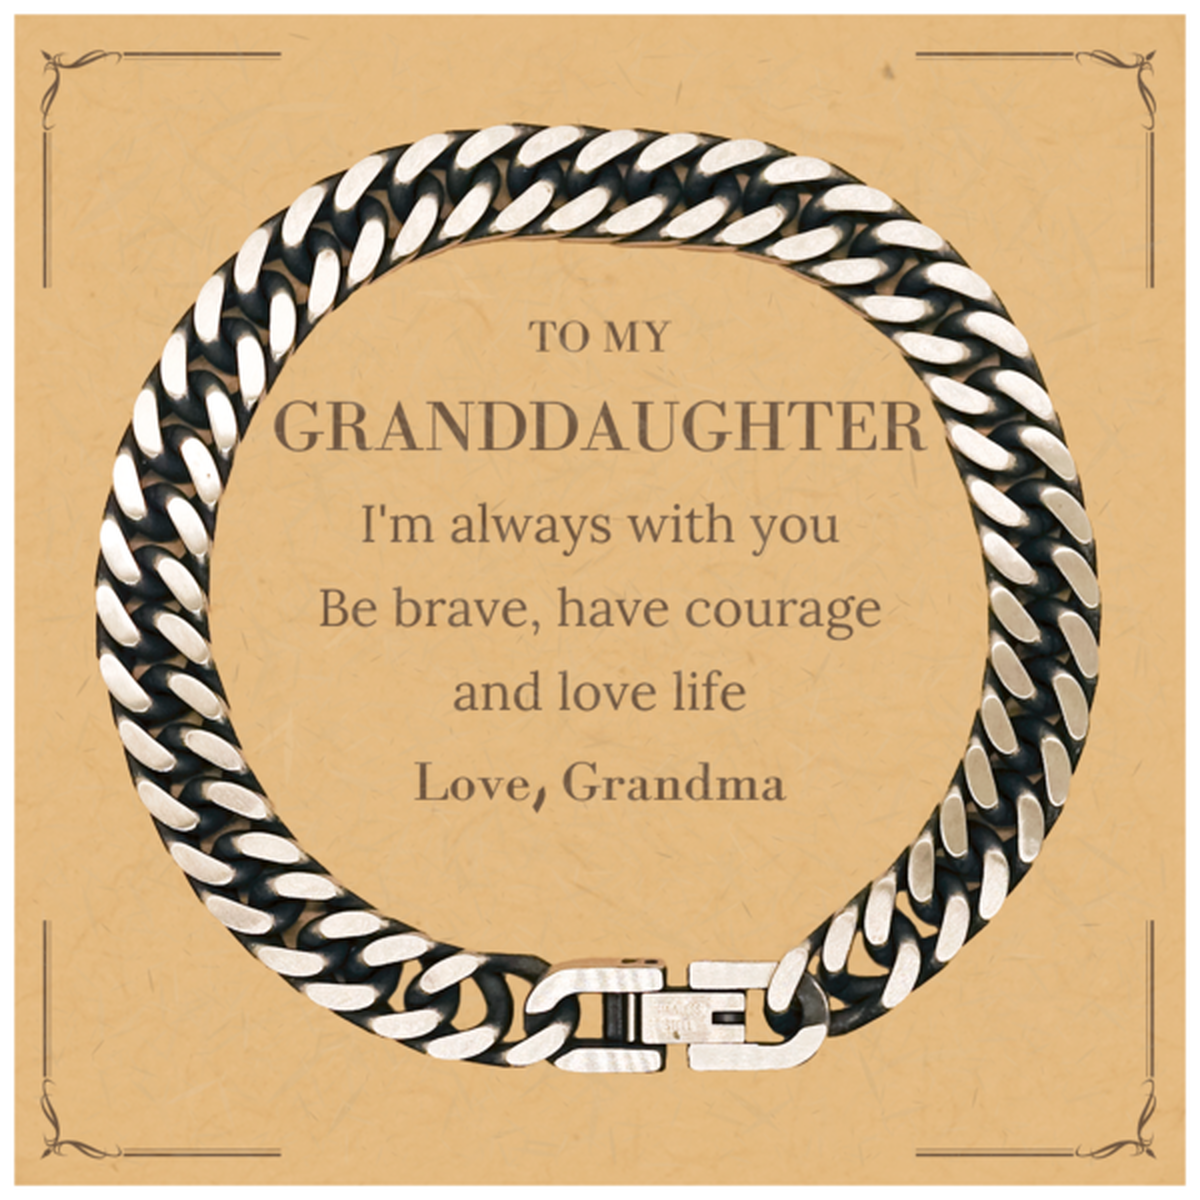 To My Granddaughter Gifts from Grandma, Unique Cuban Link Chain Bracelet Inspirational Christmas Birthday Graduation Gifts for Granddaughter I'm always with you. Be brave, have courage and love life. Love, Grandma